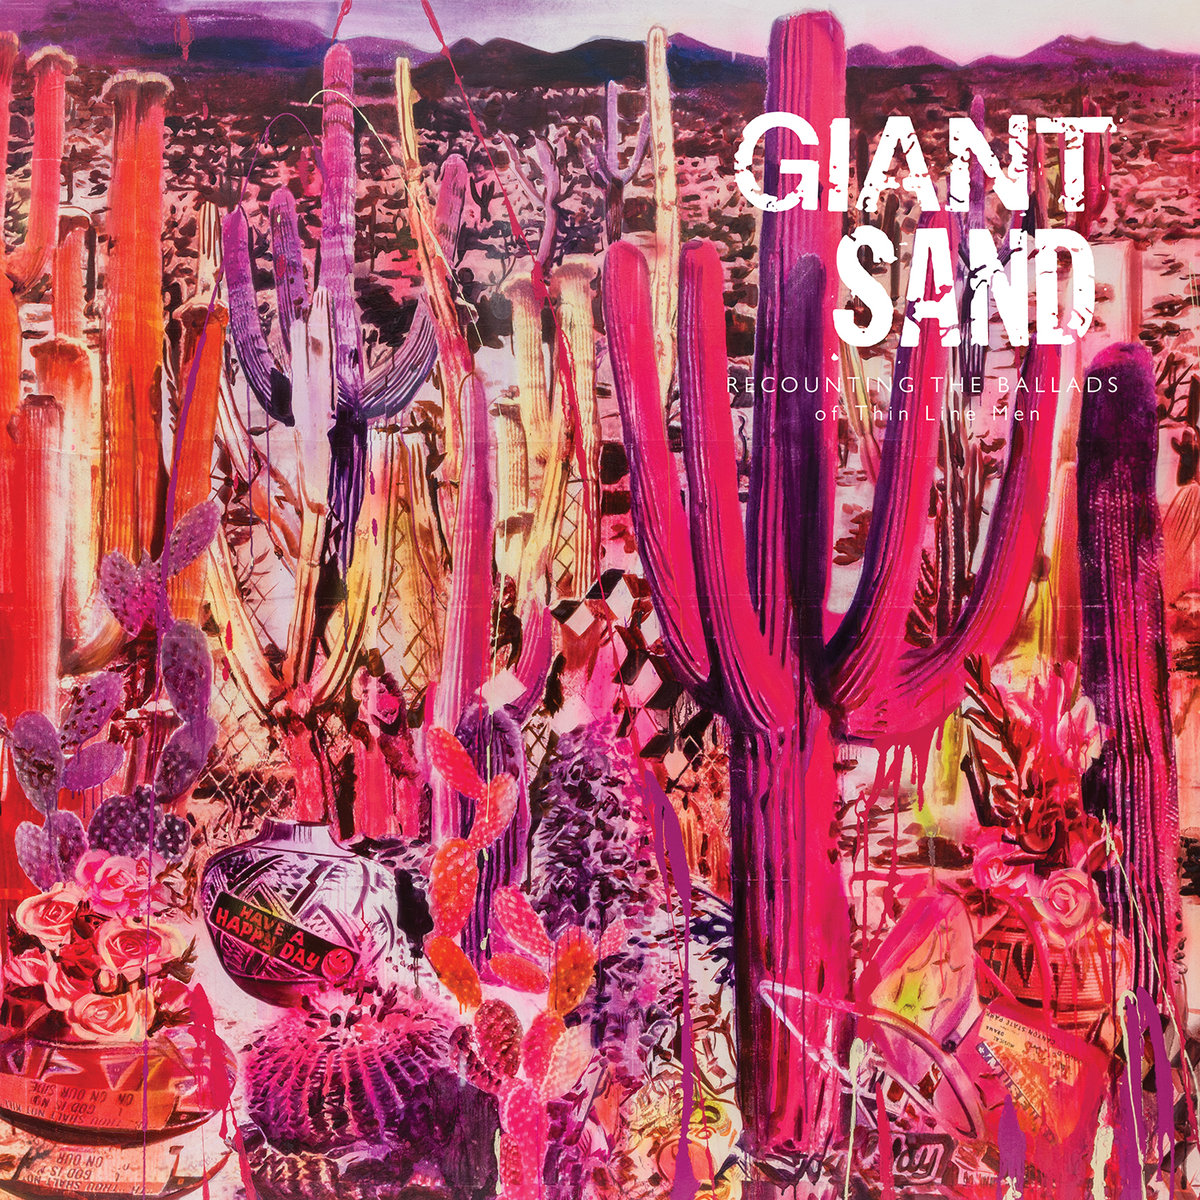 News – Giant Sand – Recounting The Ballads Of Thin Line Men